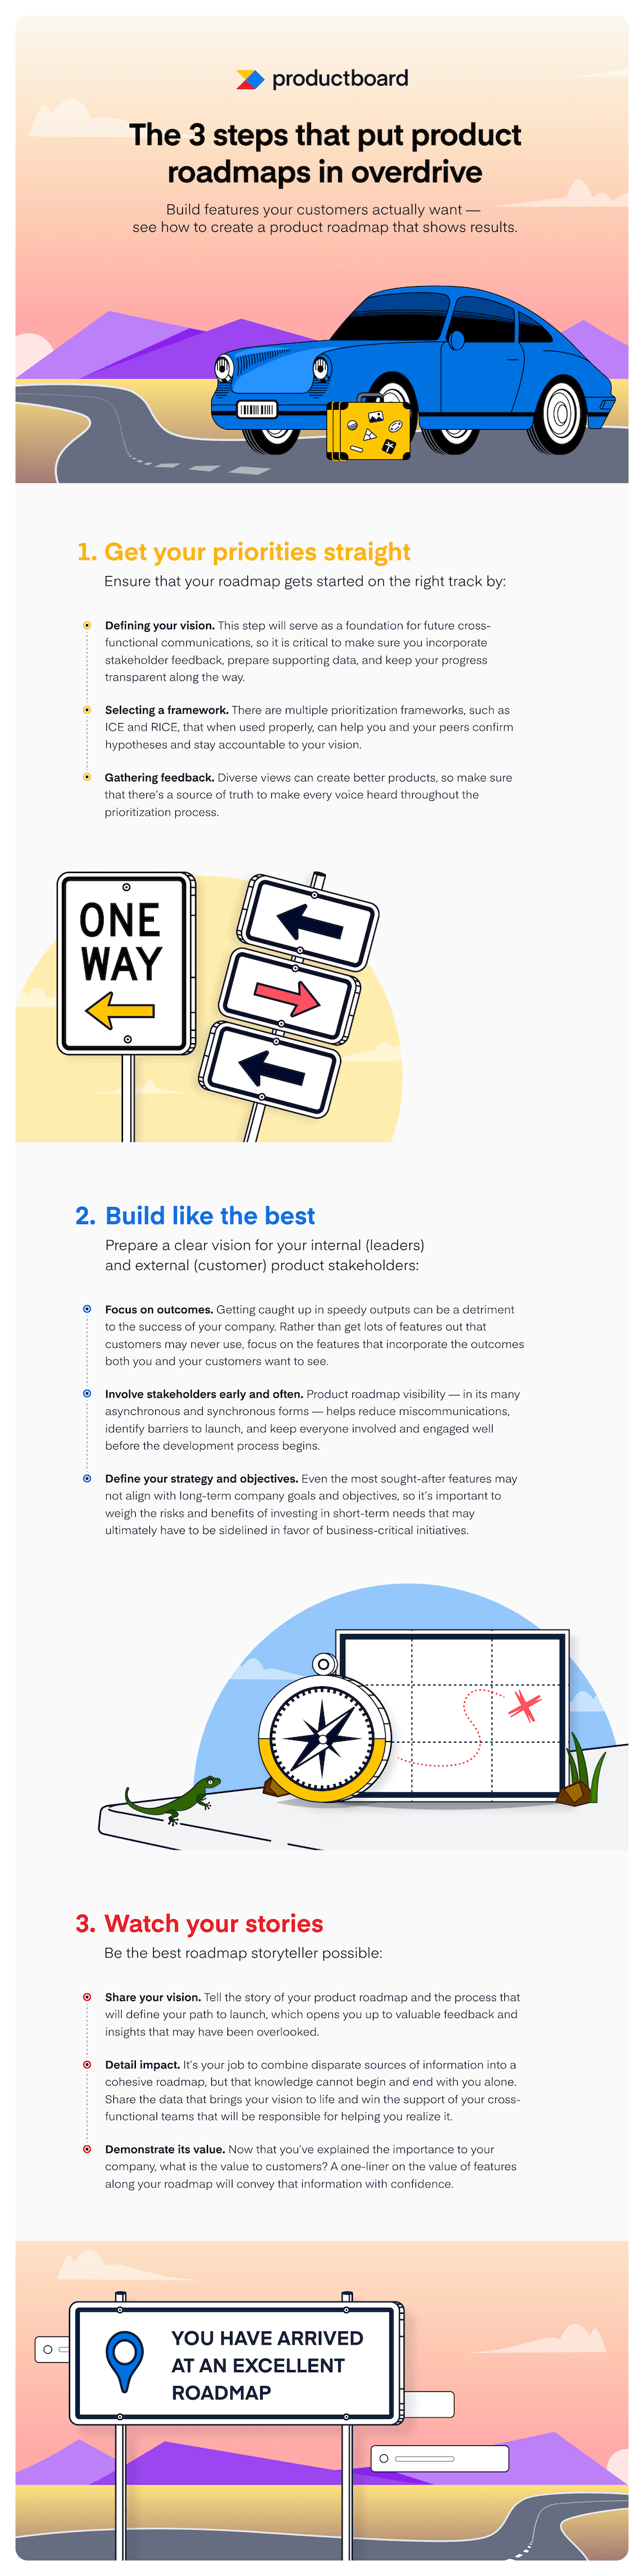 productboard-product-roadmap-infographic